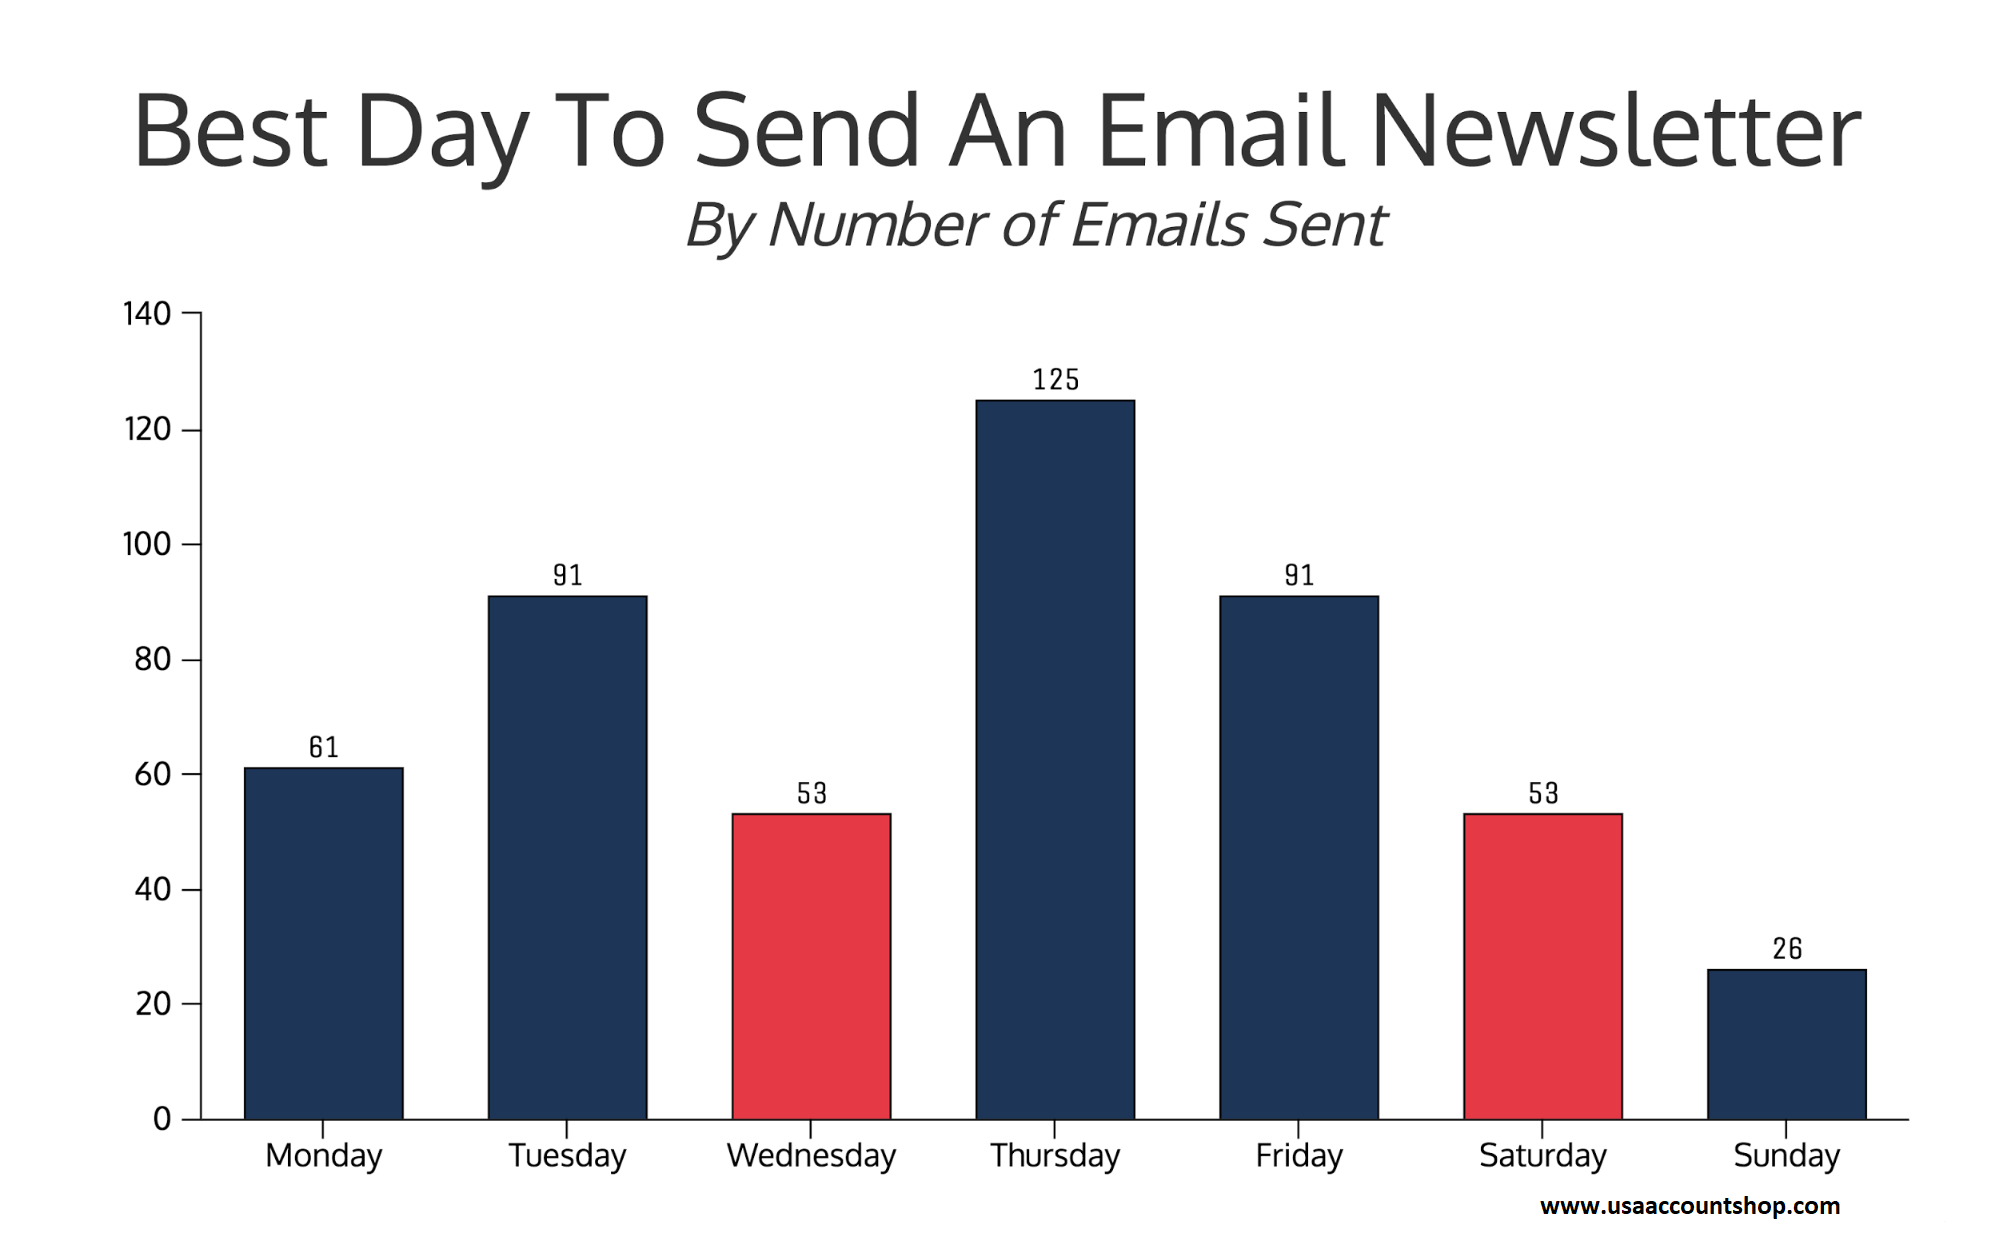 When are the best times to send emails?